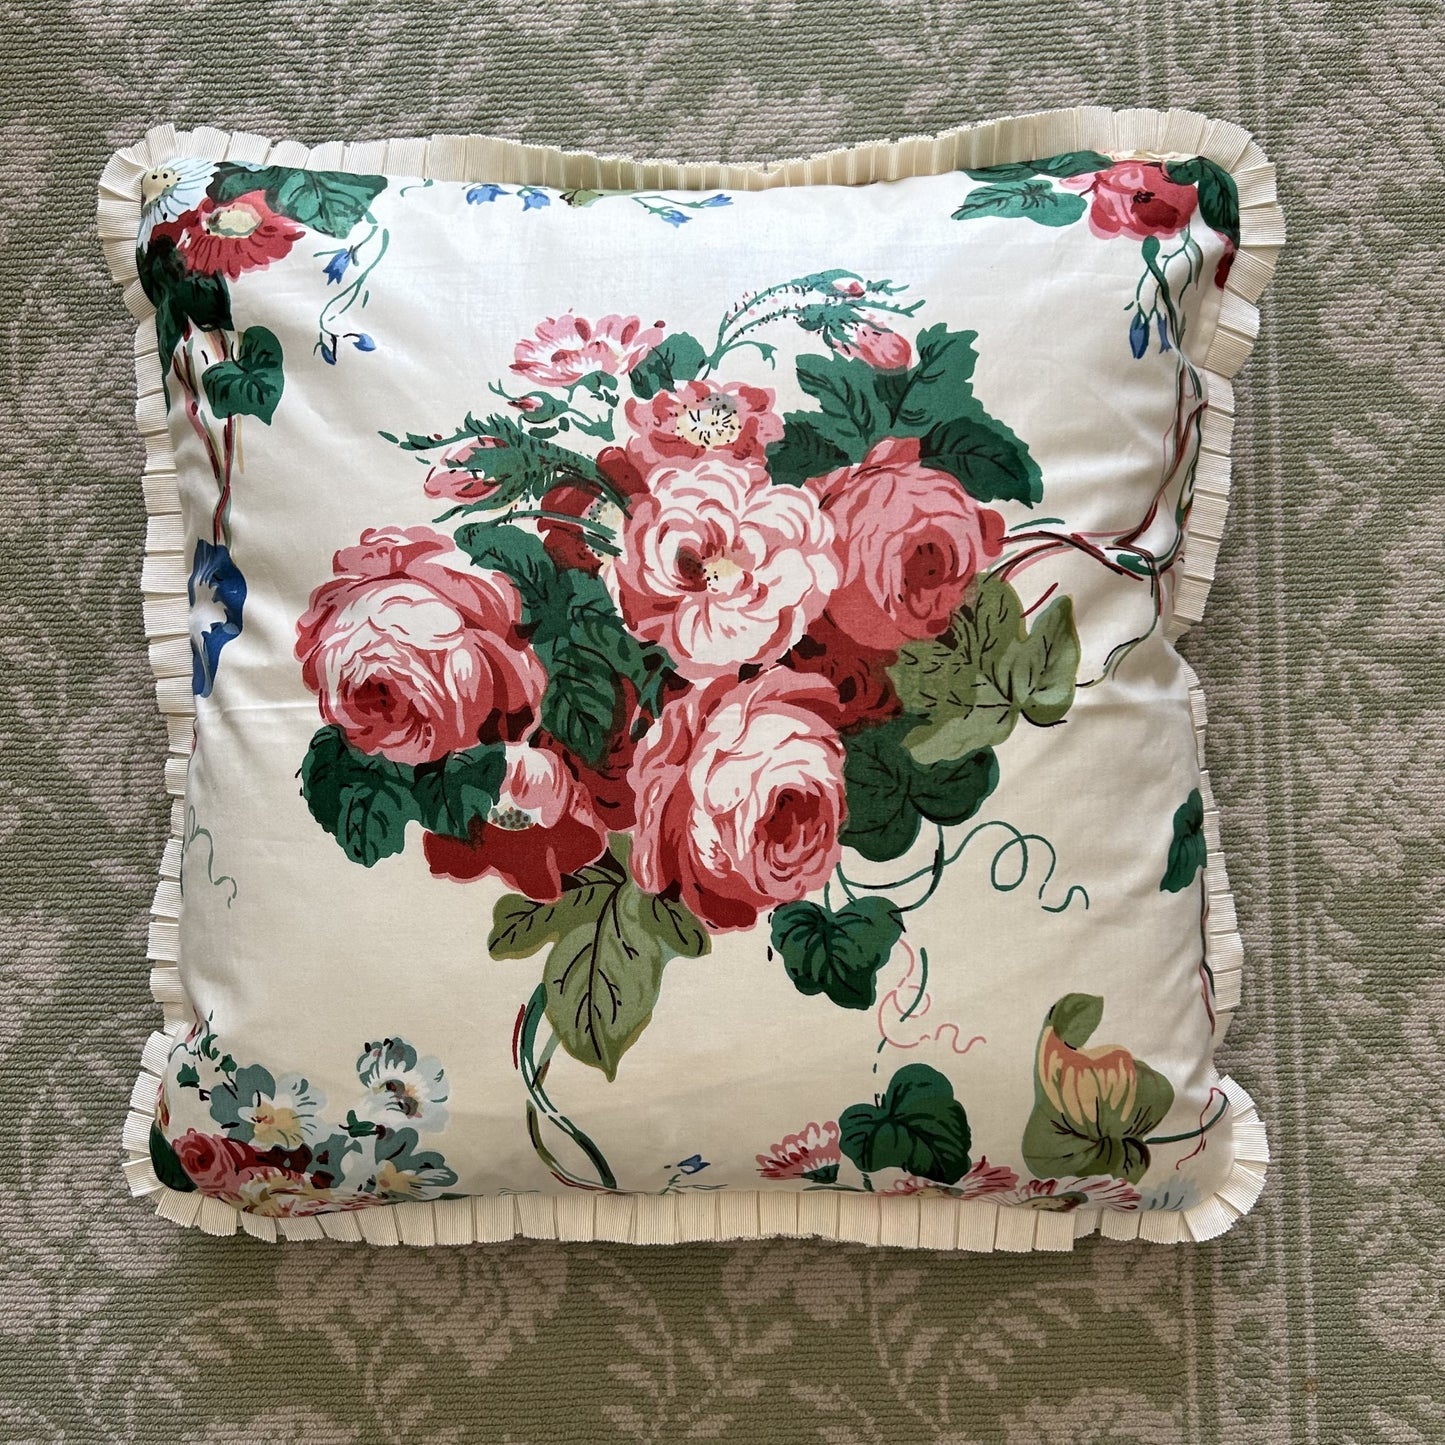 Rockingham Rose Vintage Ramm Decorative 17 x 17 Pillow with Down Feater Insert